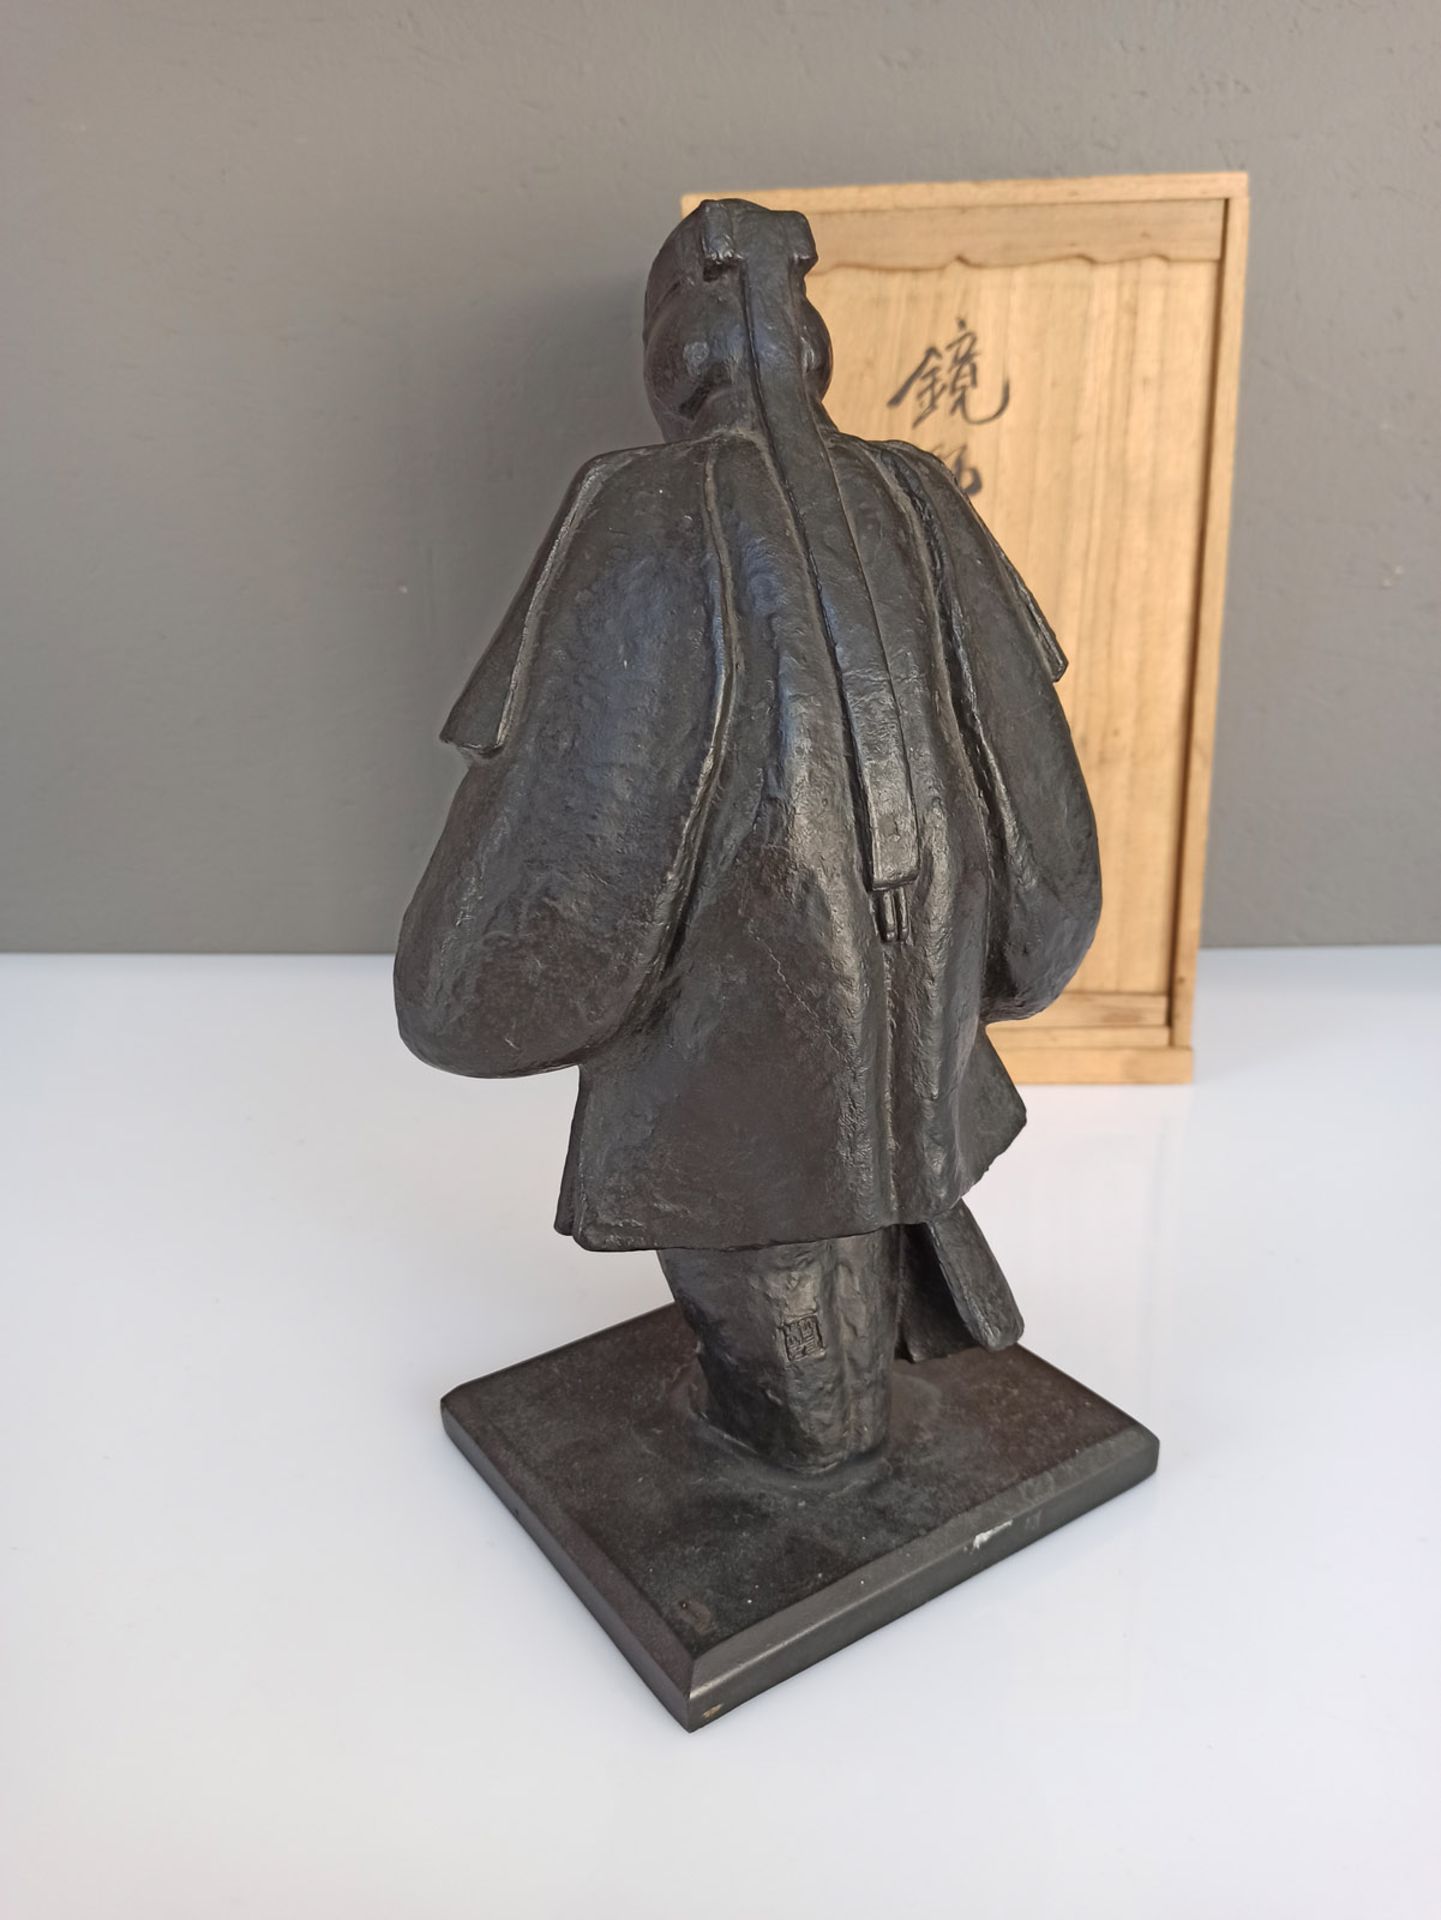 A BRONZE FIGURE OF A NÔO ACTOR WEARING A MASK BY MIURA WAKO - Image 3 of 5